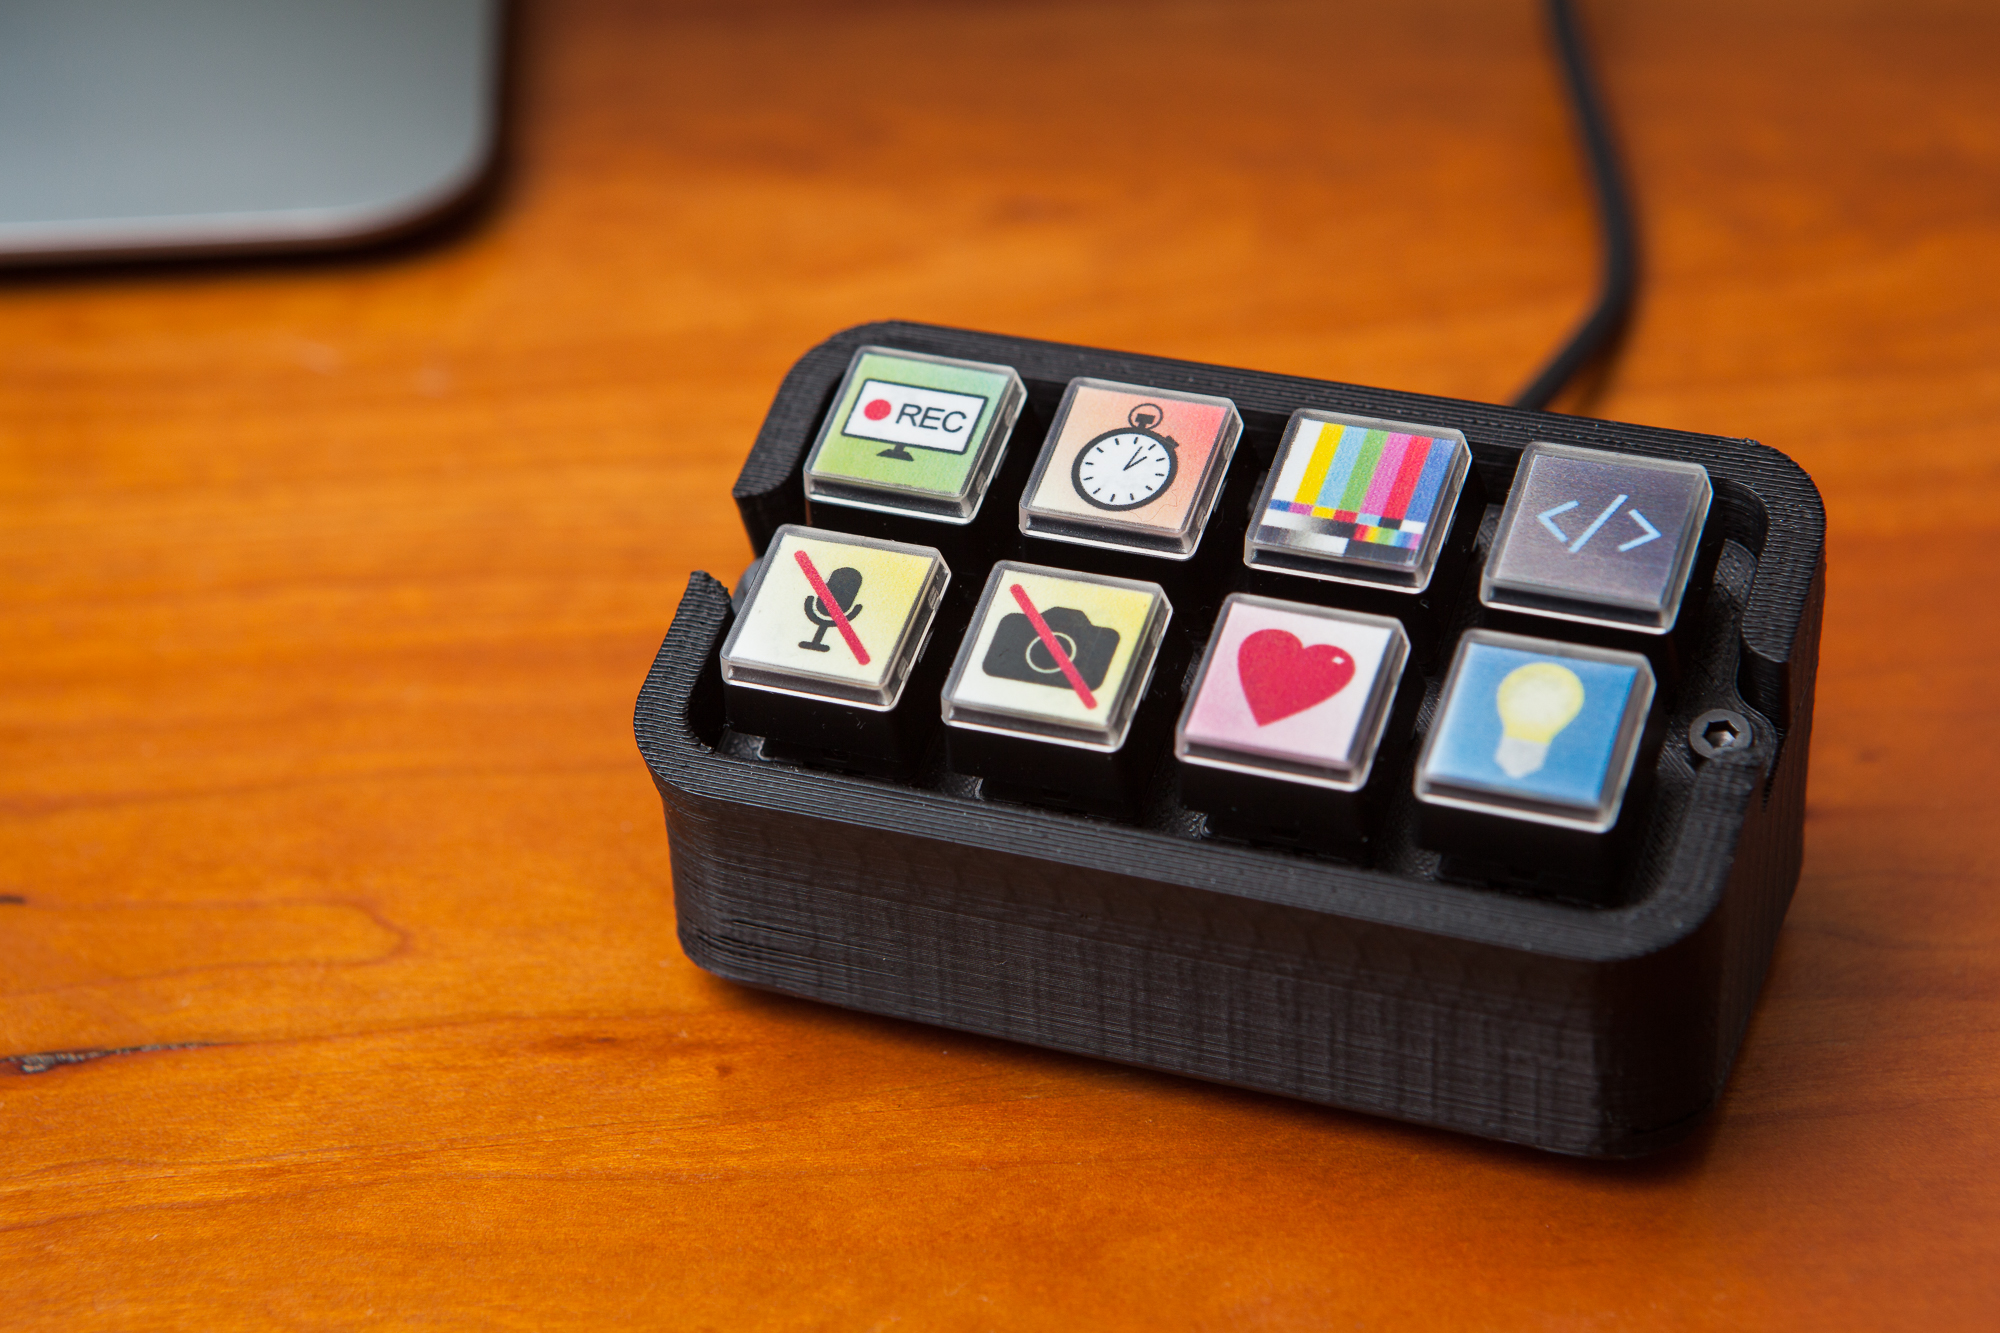 Building a DIY Stream Deck (Mini Macro Keyboard) - Parts Not Included